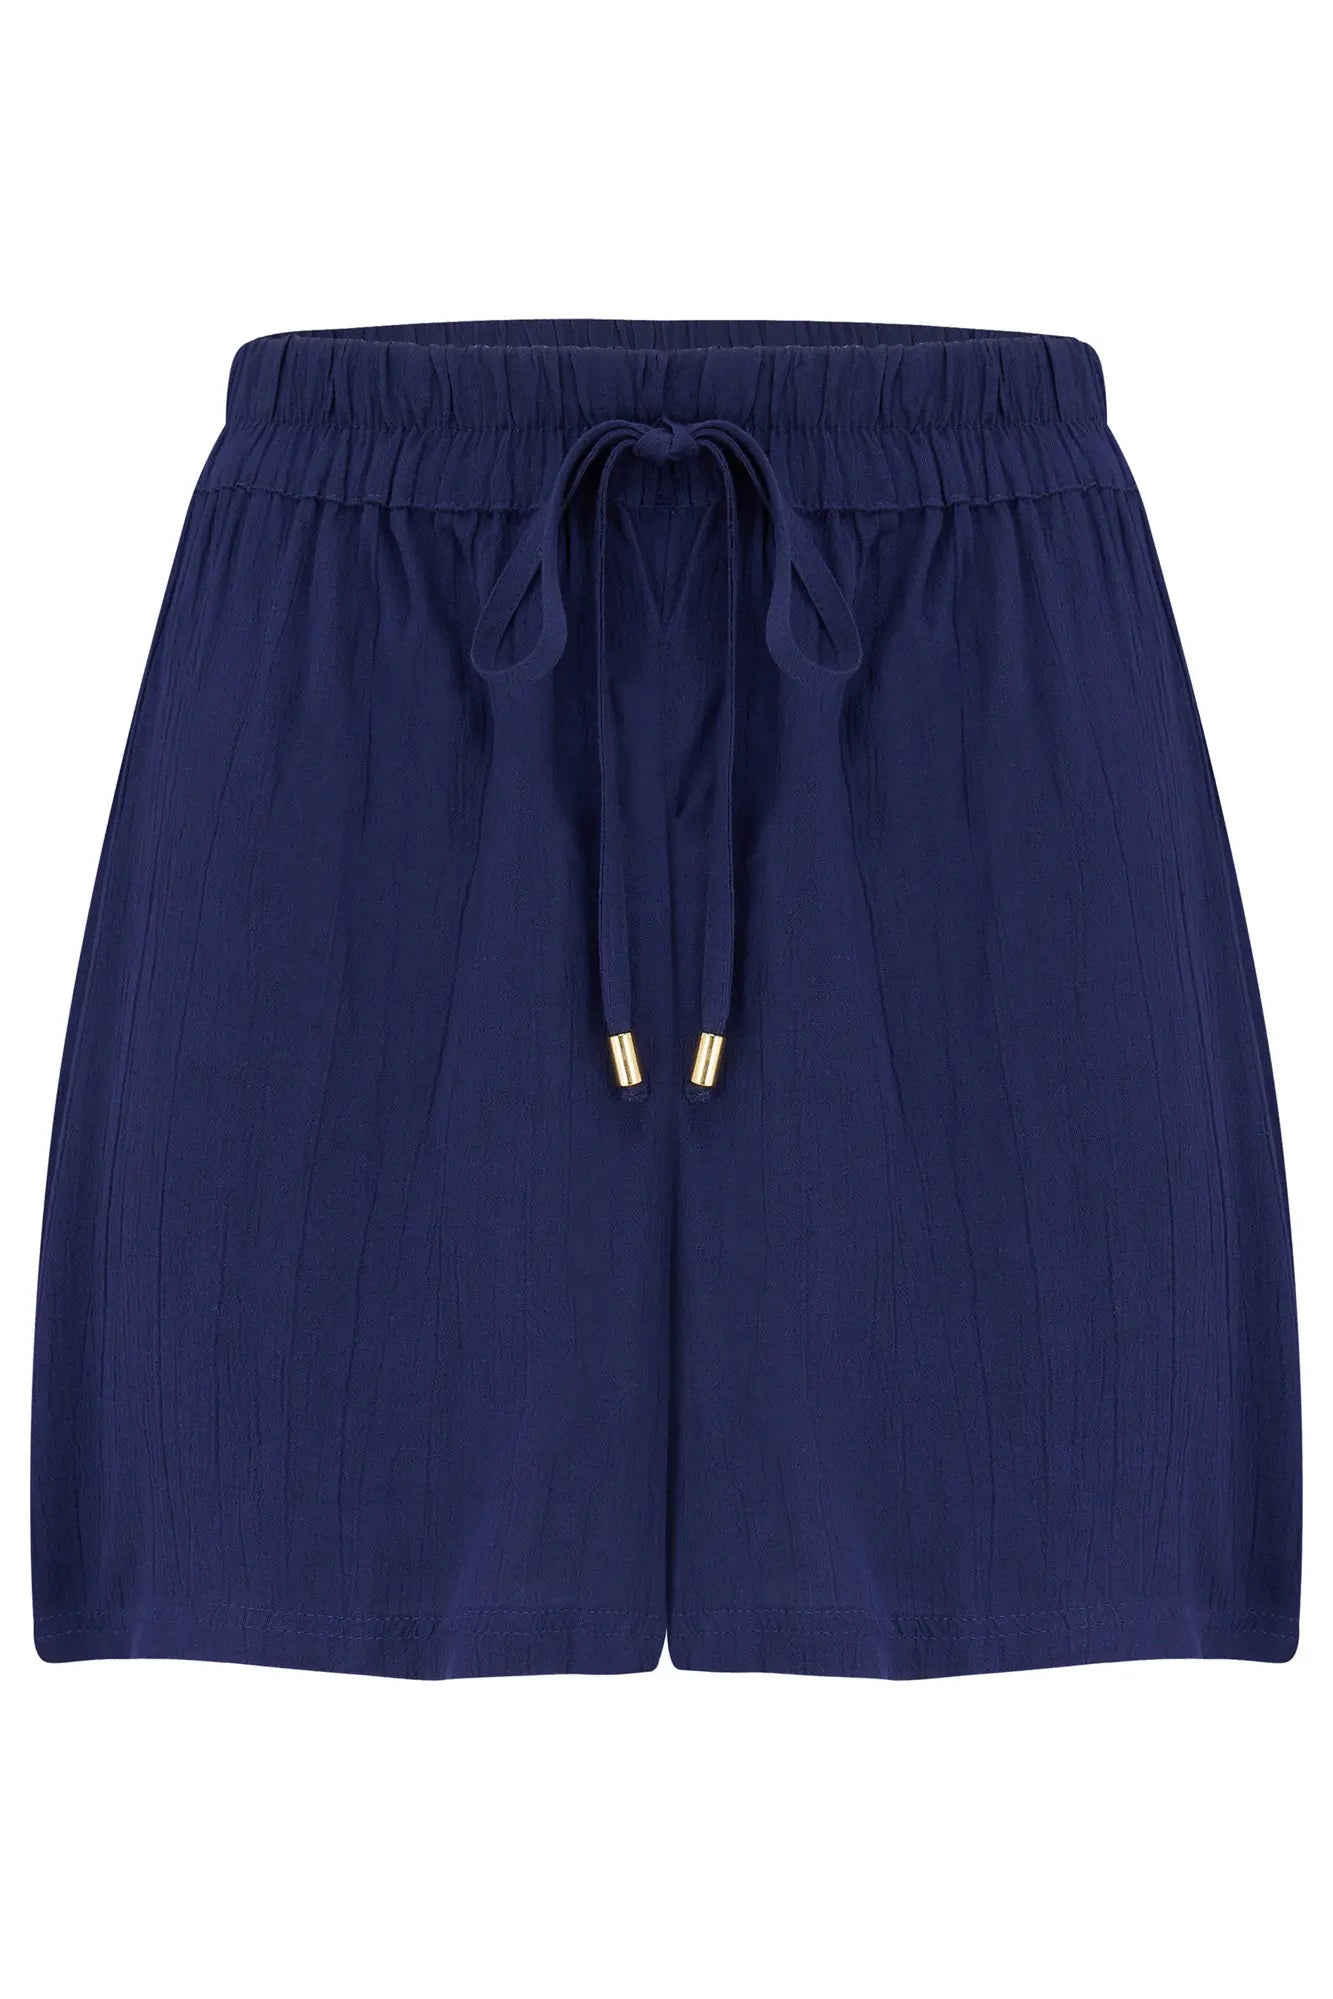 Crinkle Viscose Gold Trim Beach Shorts In Navy - Pour Moi